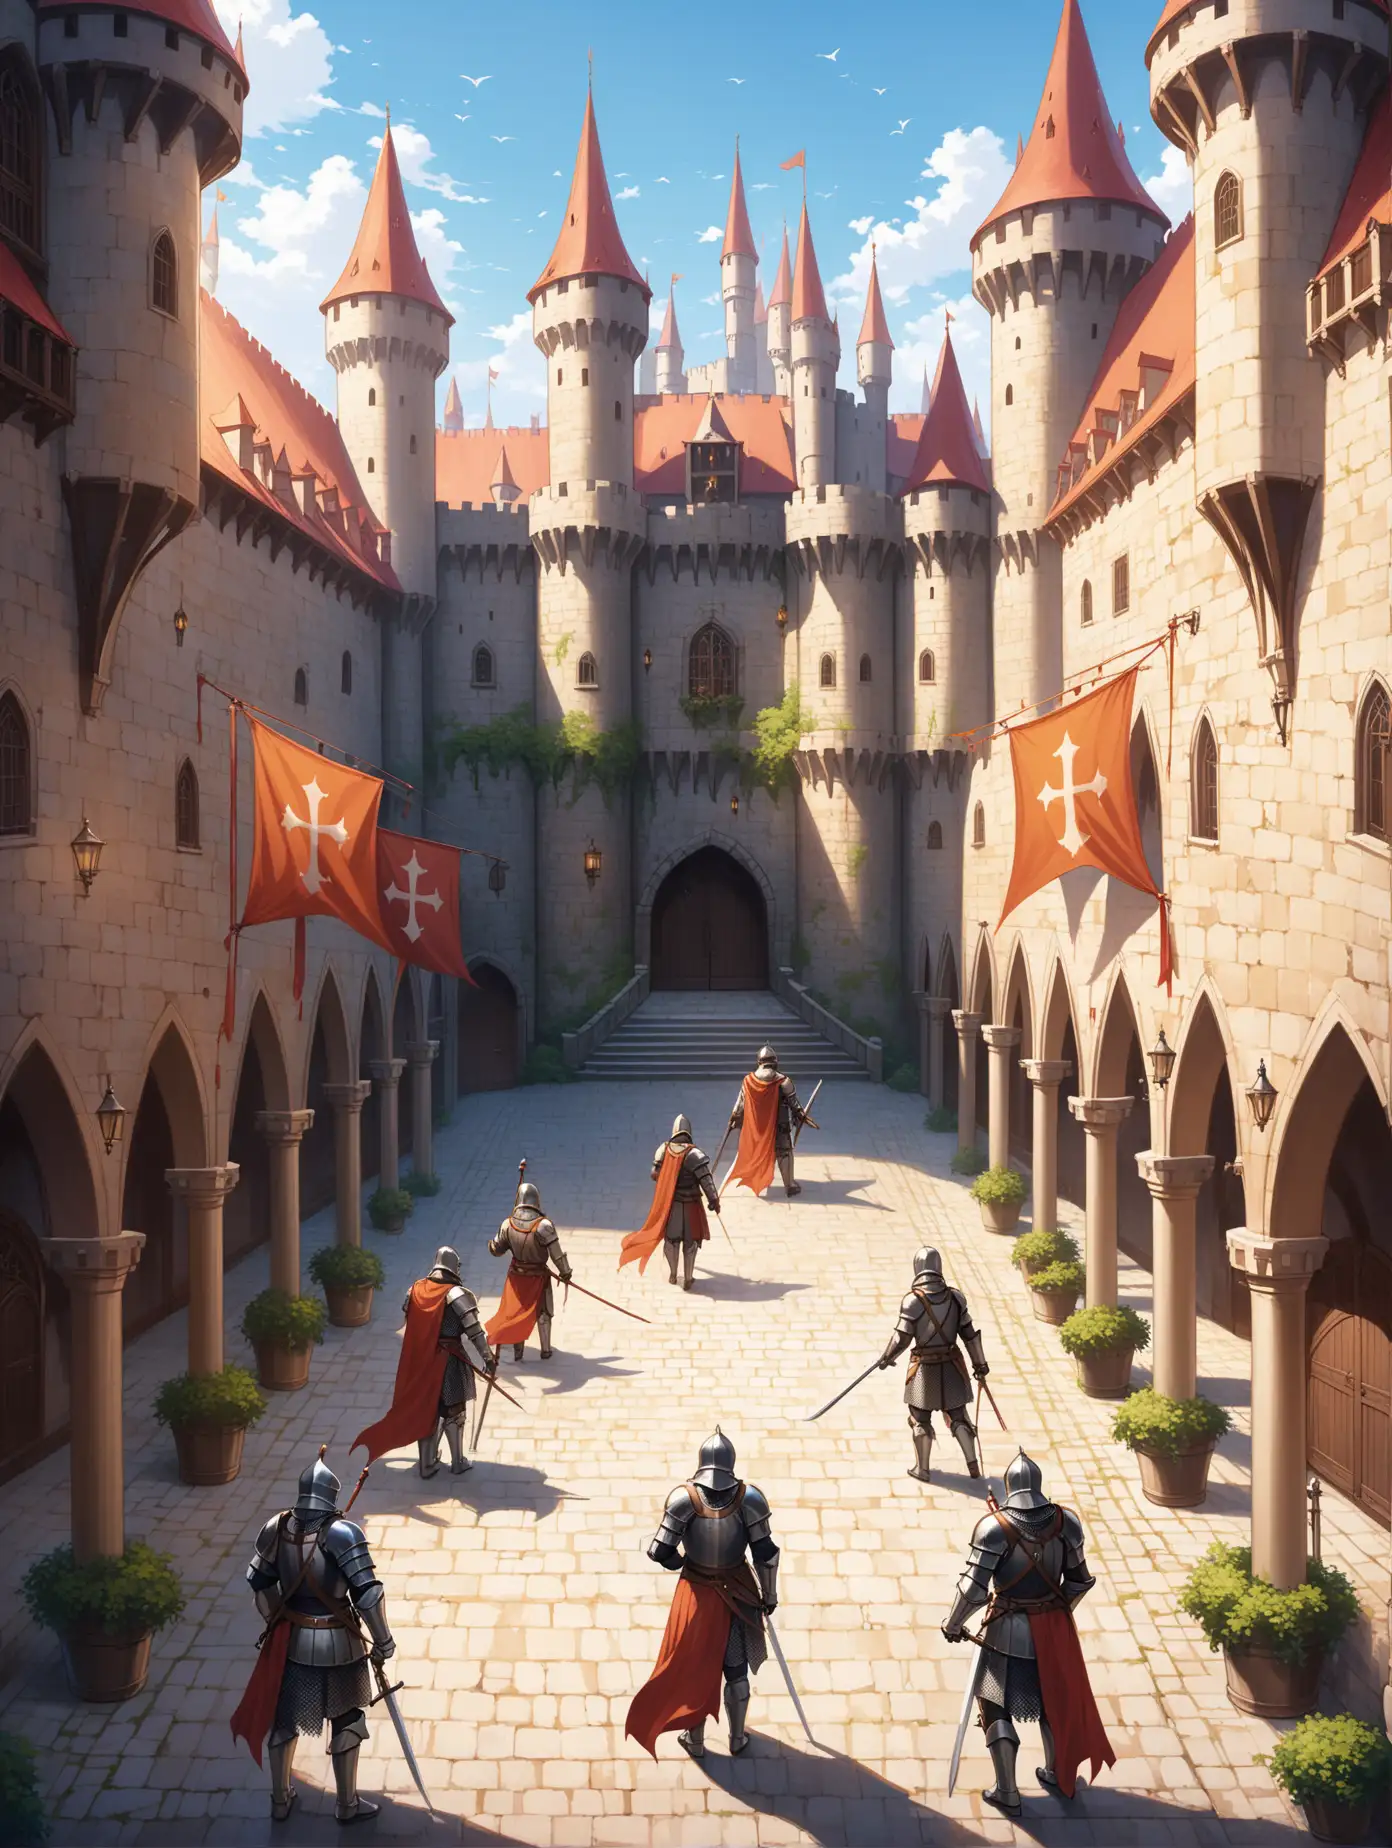 Castle courtyard with knights and banners